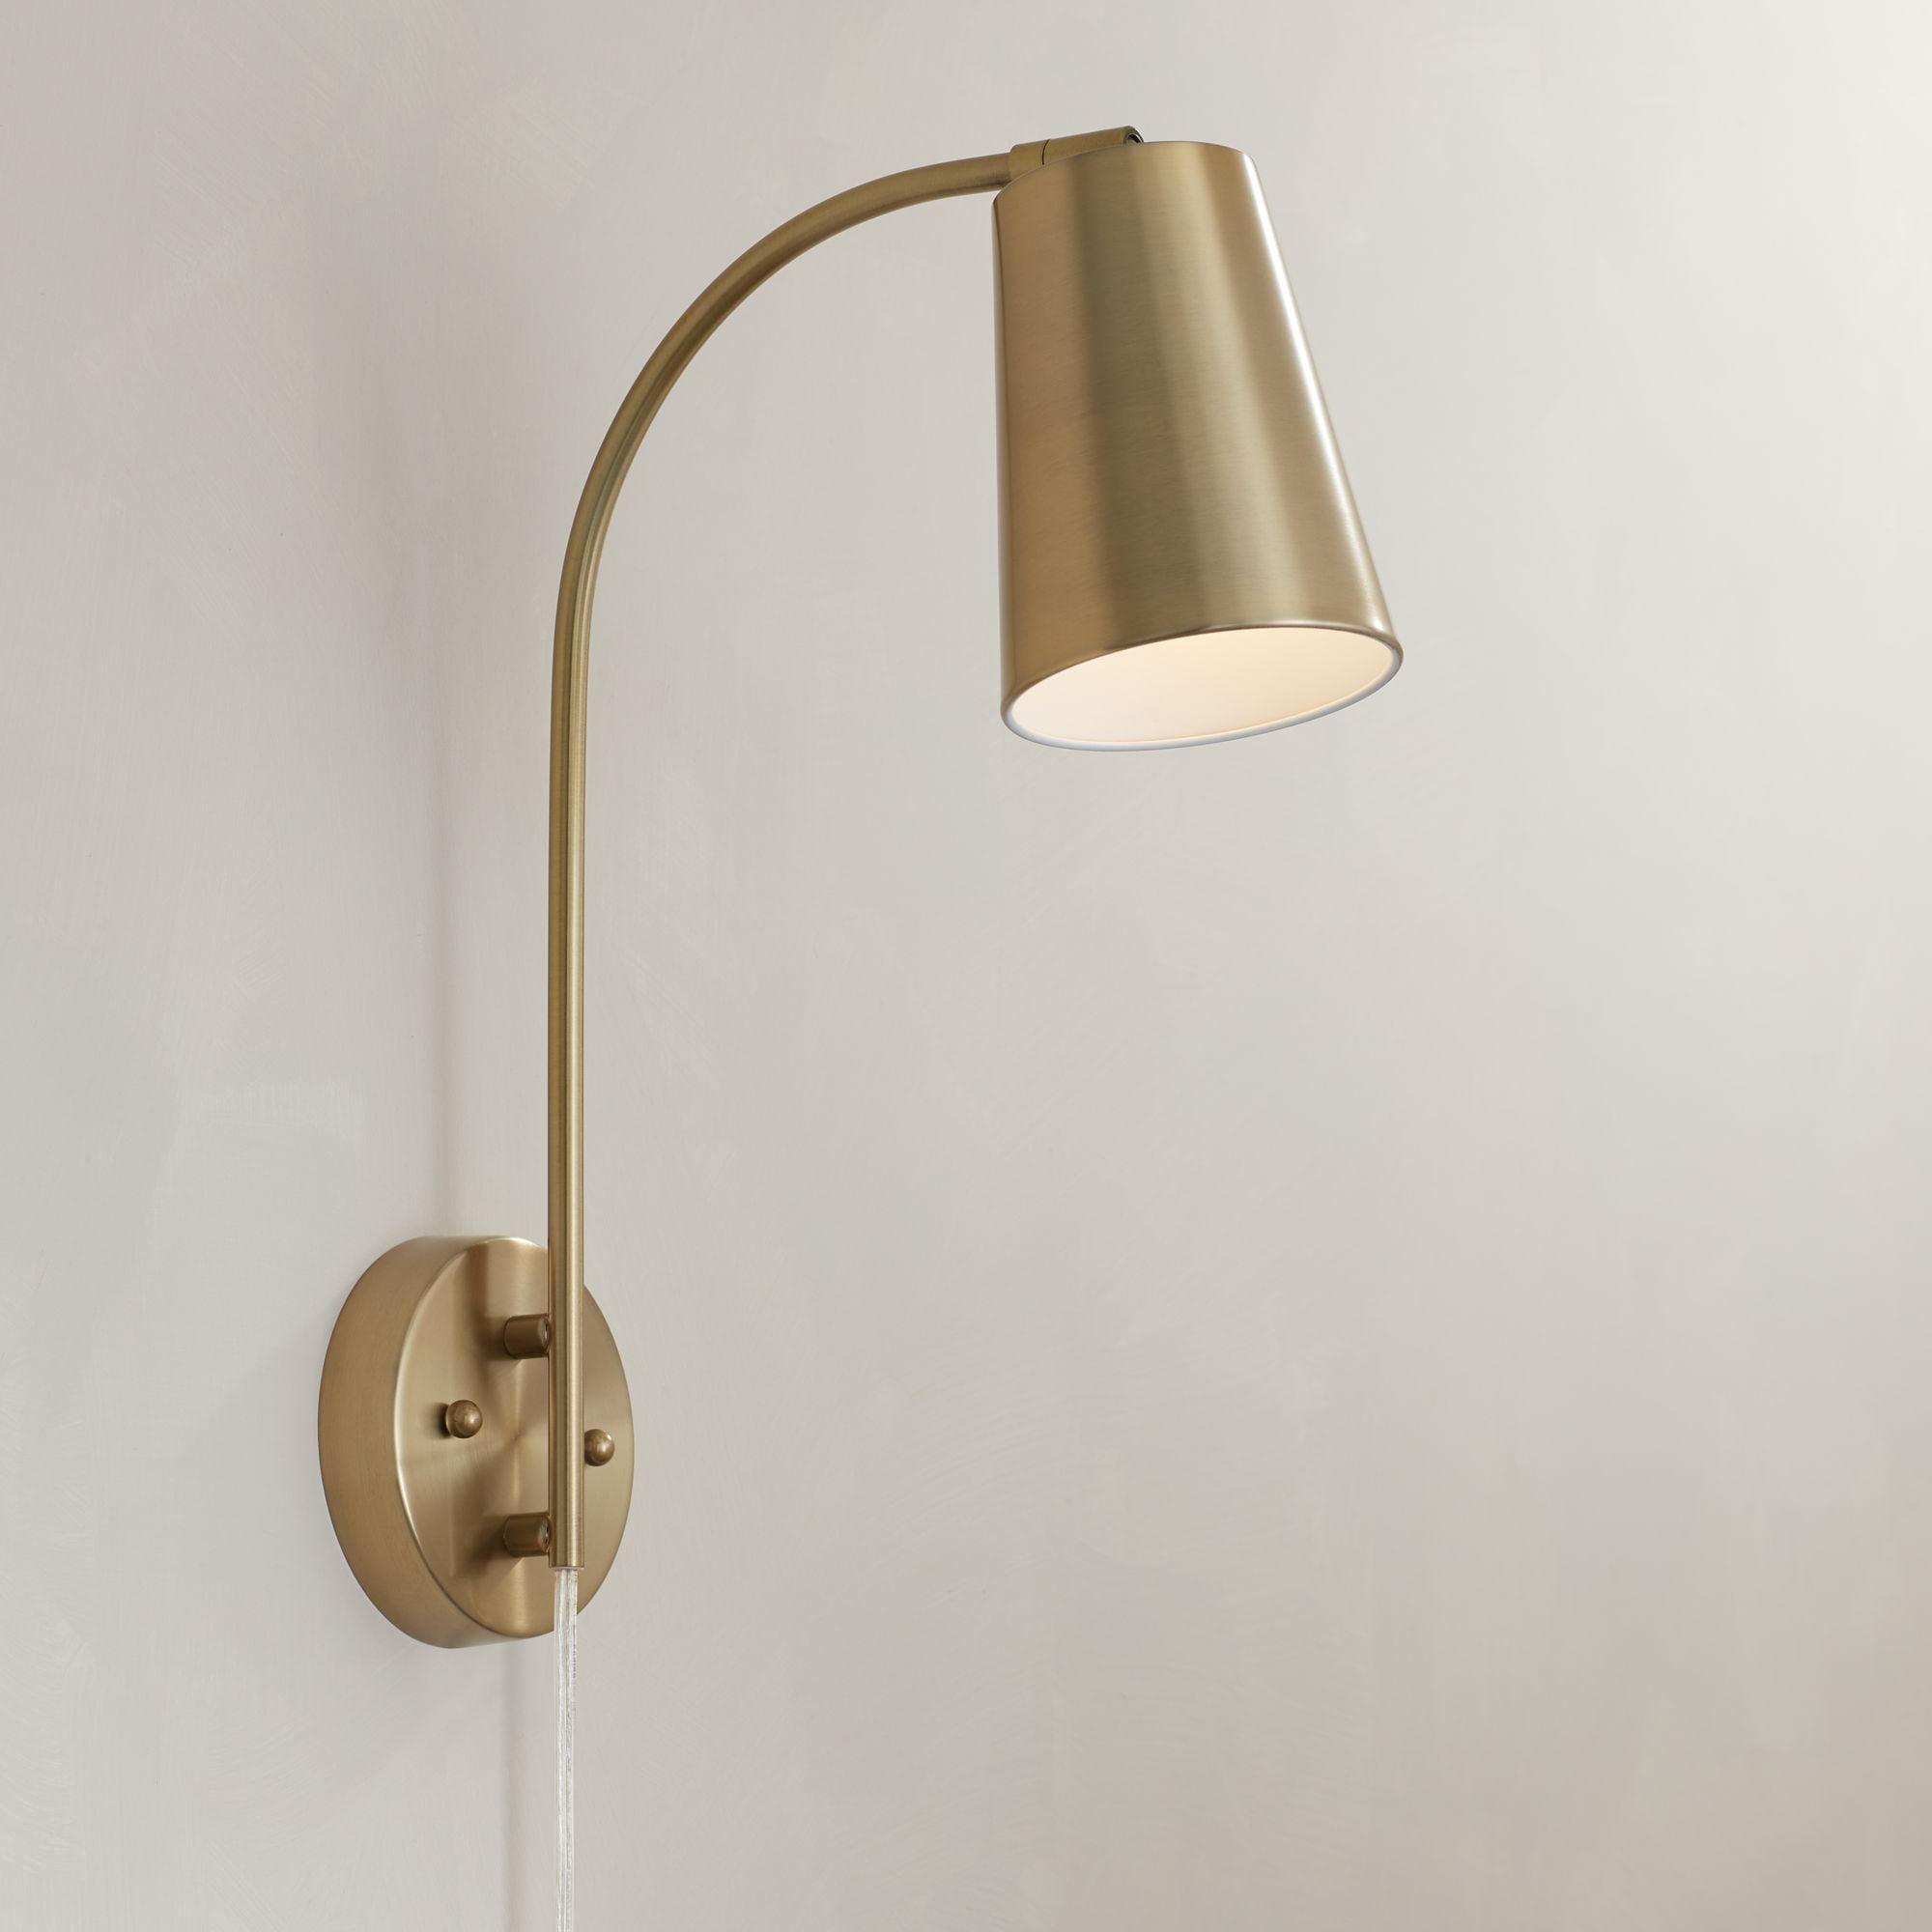 Warm Brass Adjustable Head Plug-In Wall Lamp with Dimmer